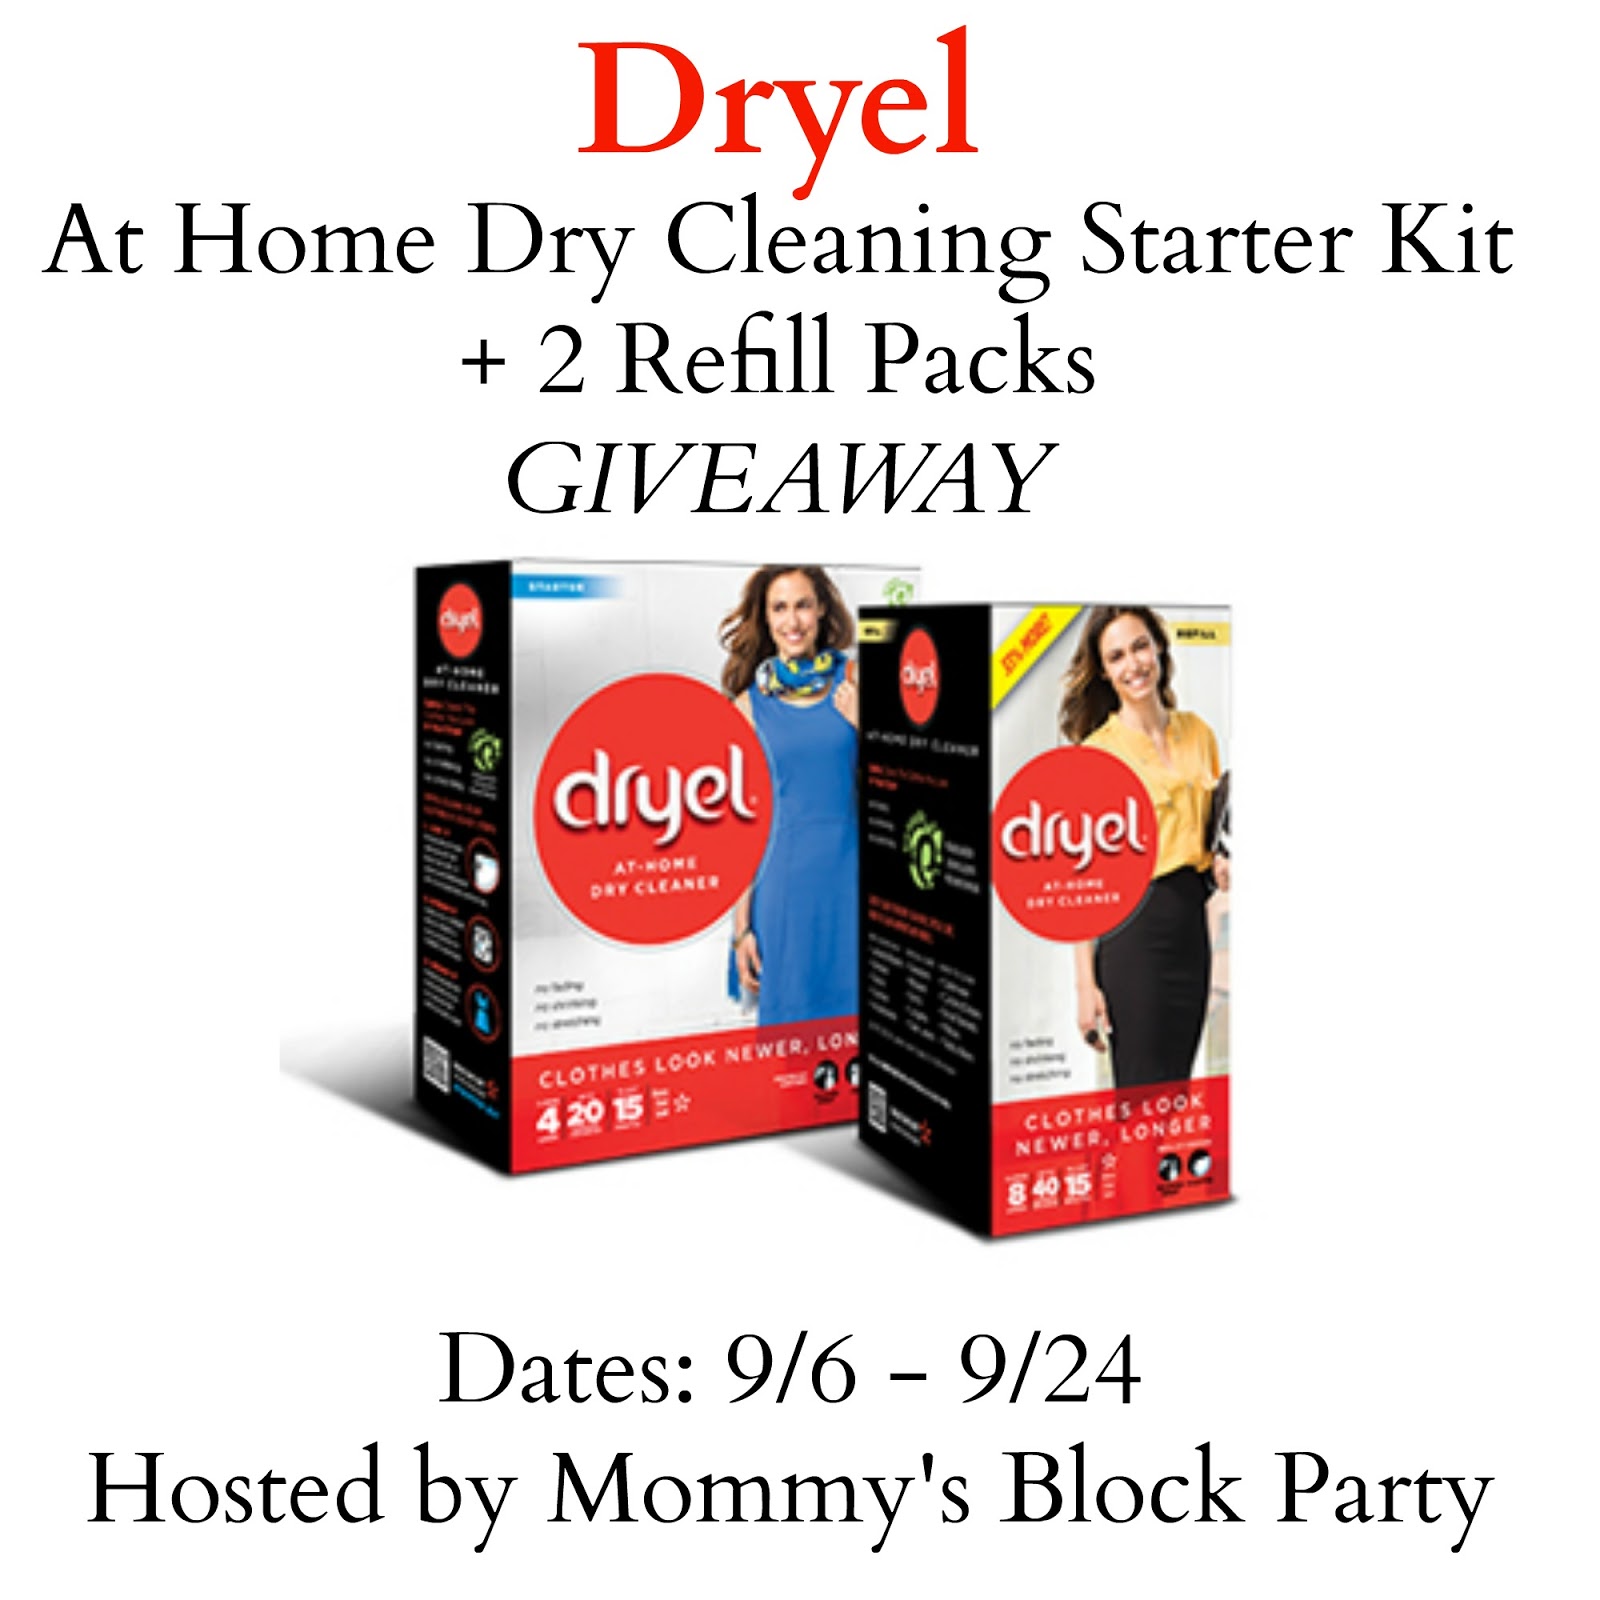 How Dryel saves me time and money on dry cleaning (giveaway